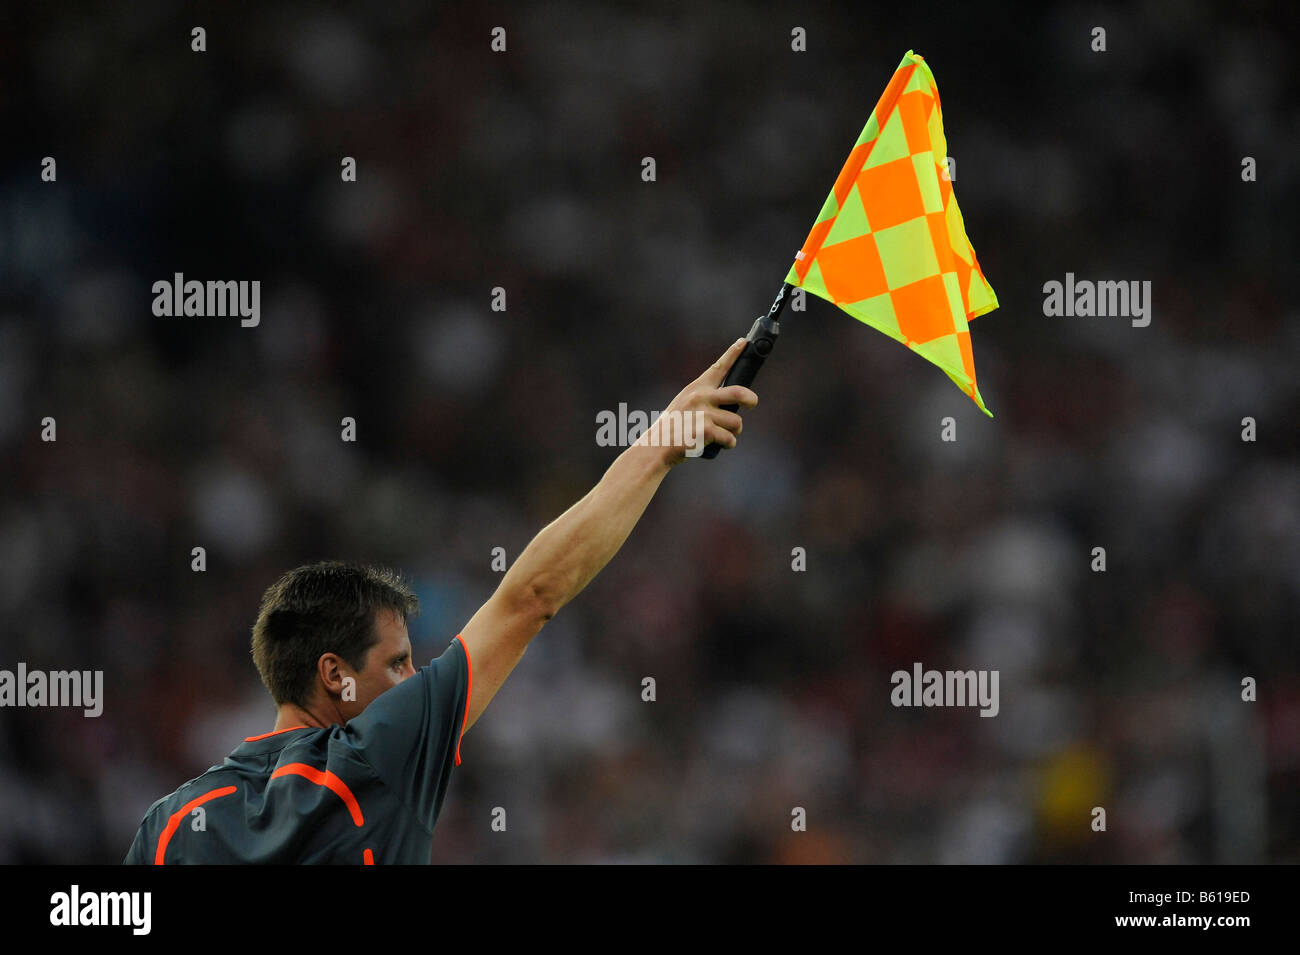 Flag of a linesman indicating match interruption or offside during a football match Stock Photo